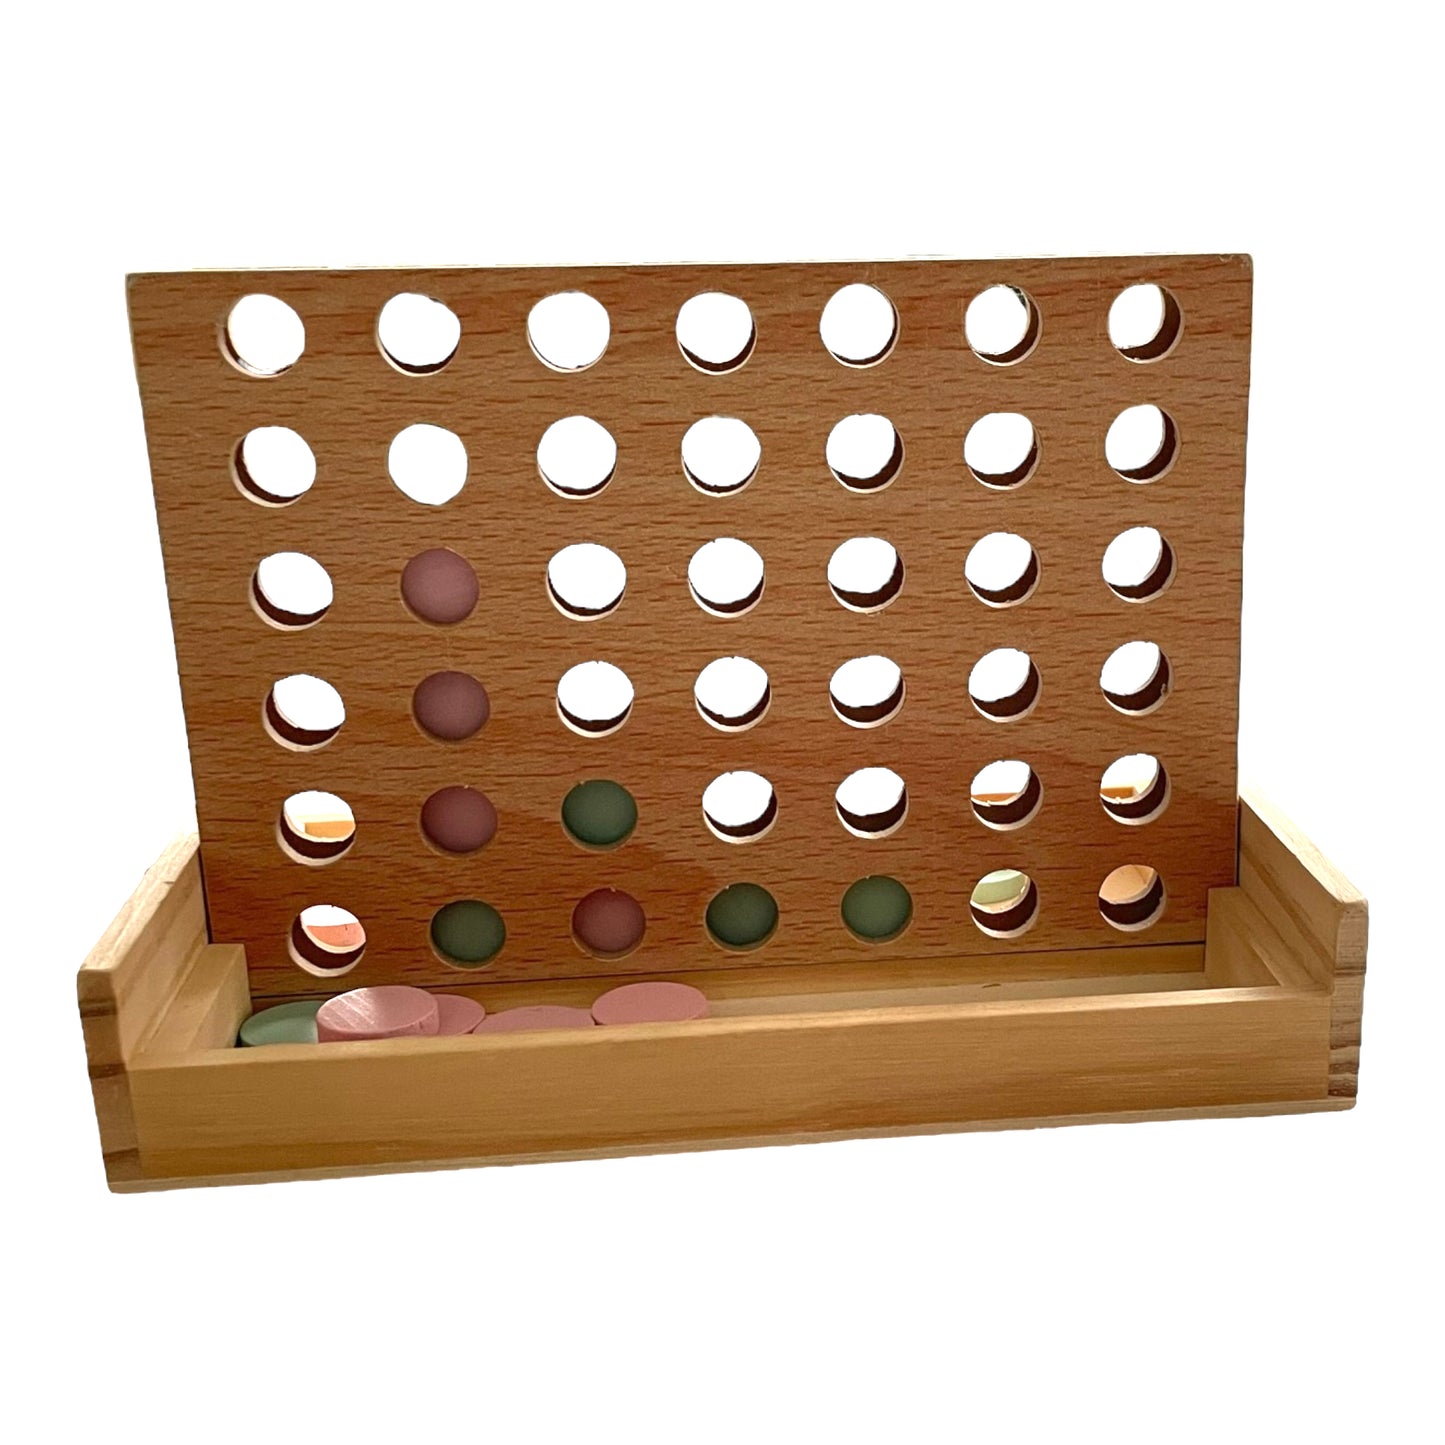 Connect 4, Wood board game